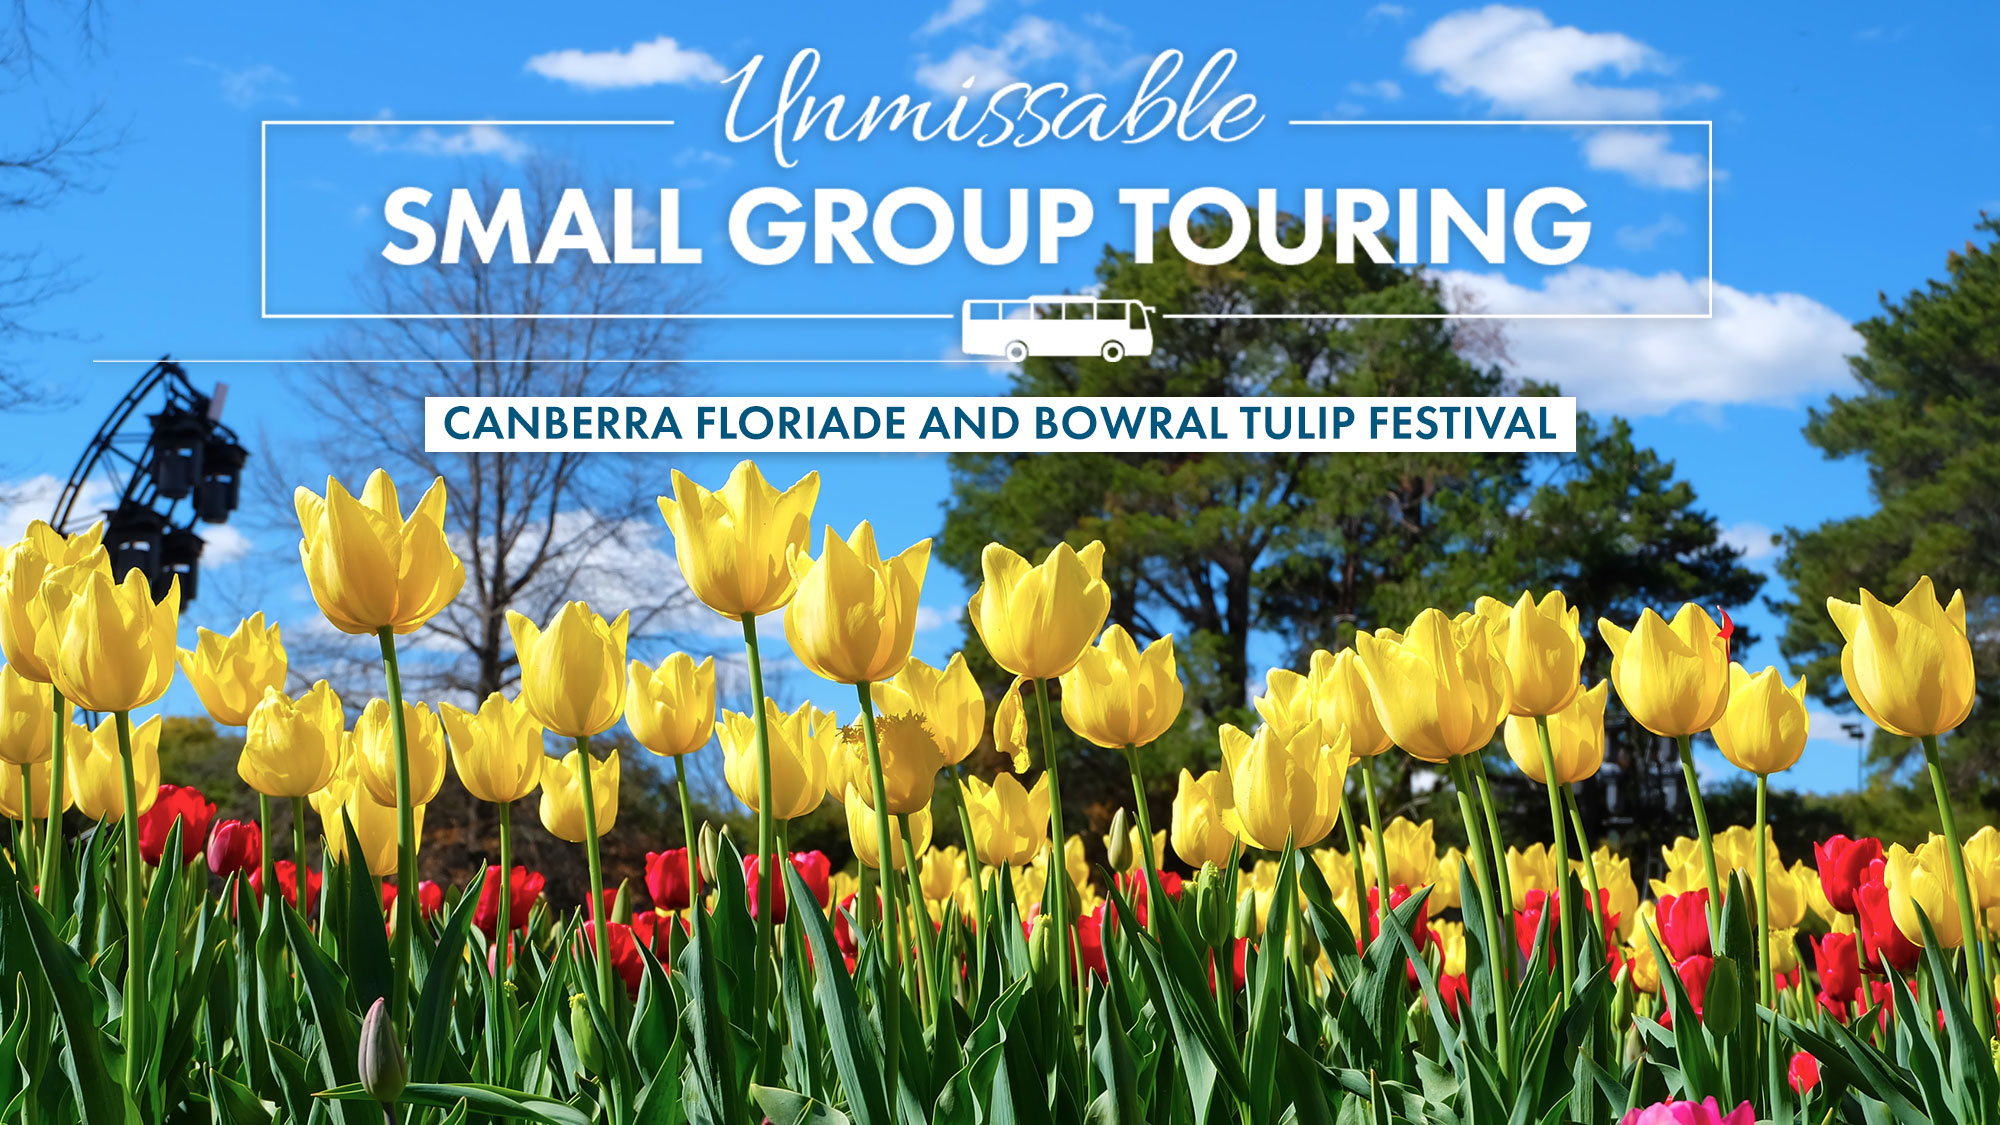 Canberra Floriade and Bowral Tulip Festival Hosted Small Group